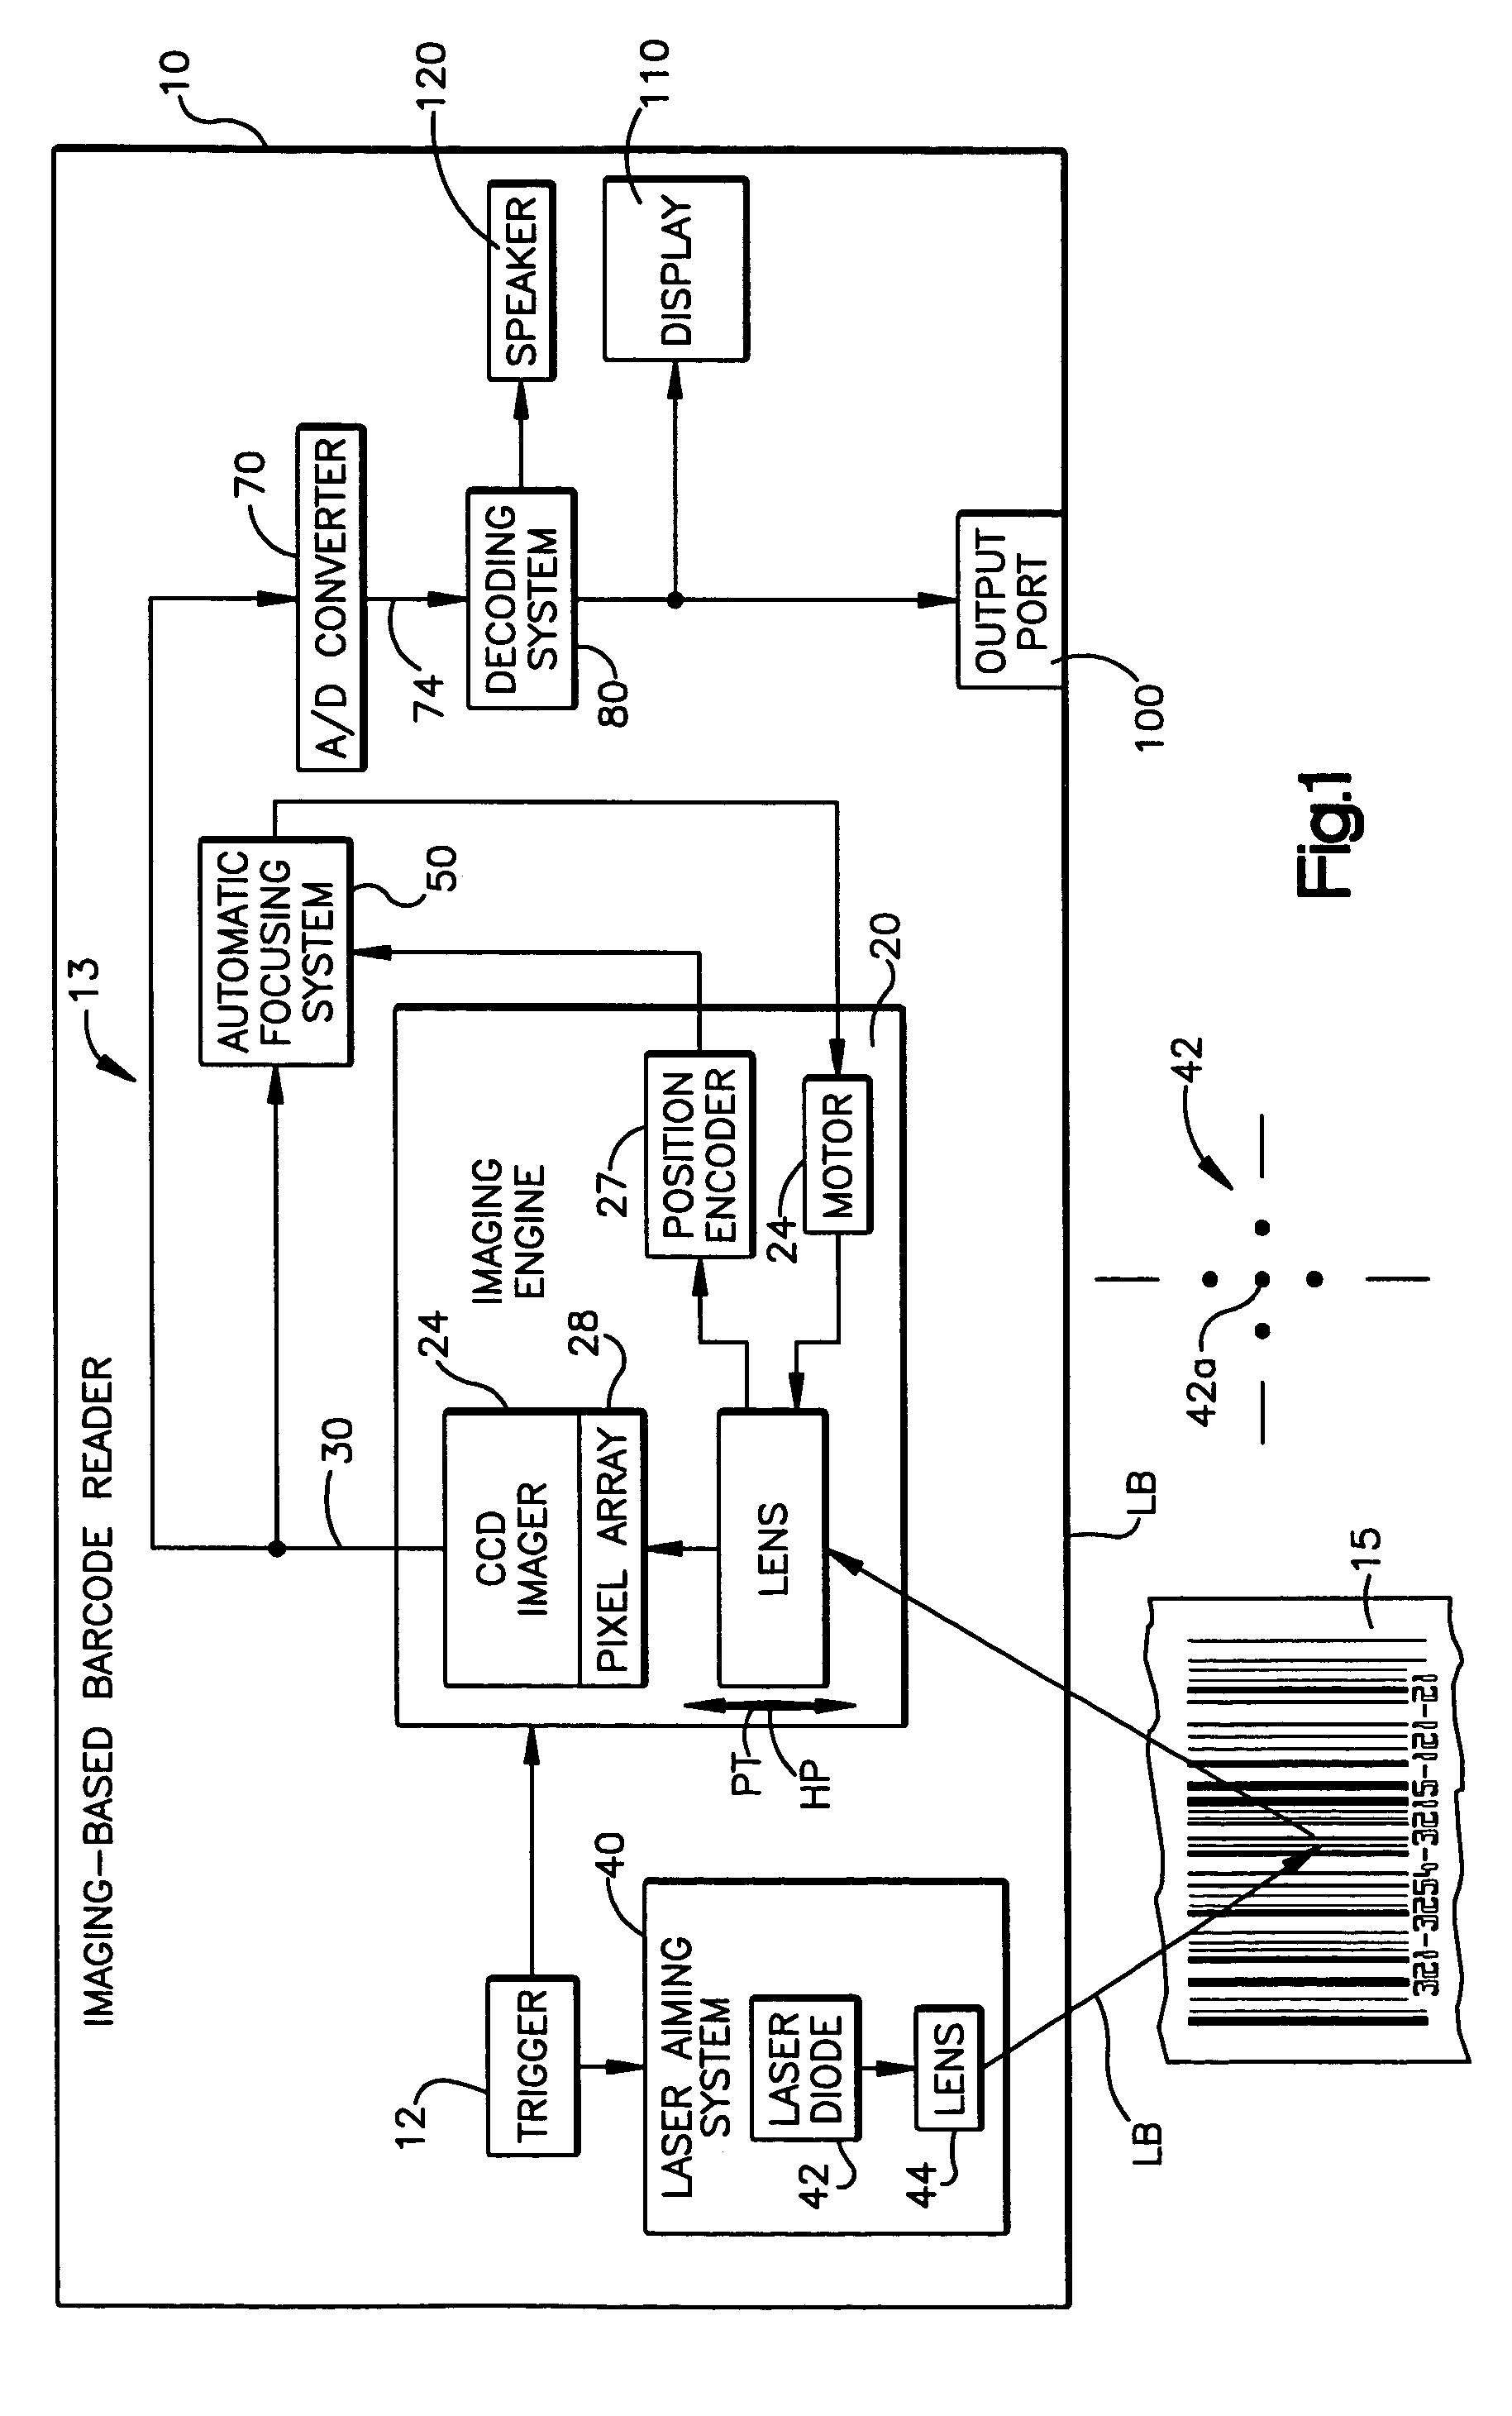 Automatic focusing system for imaging-based bar code reader